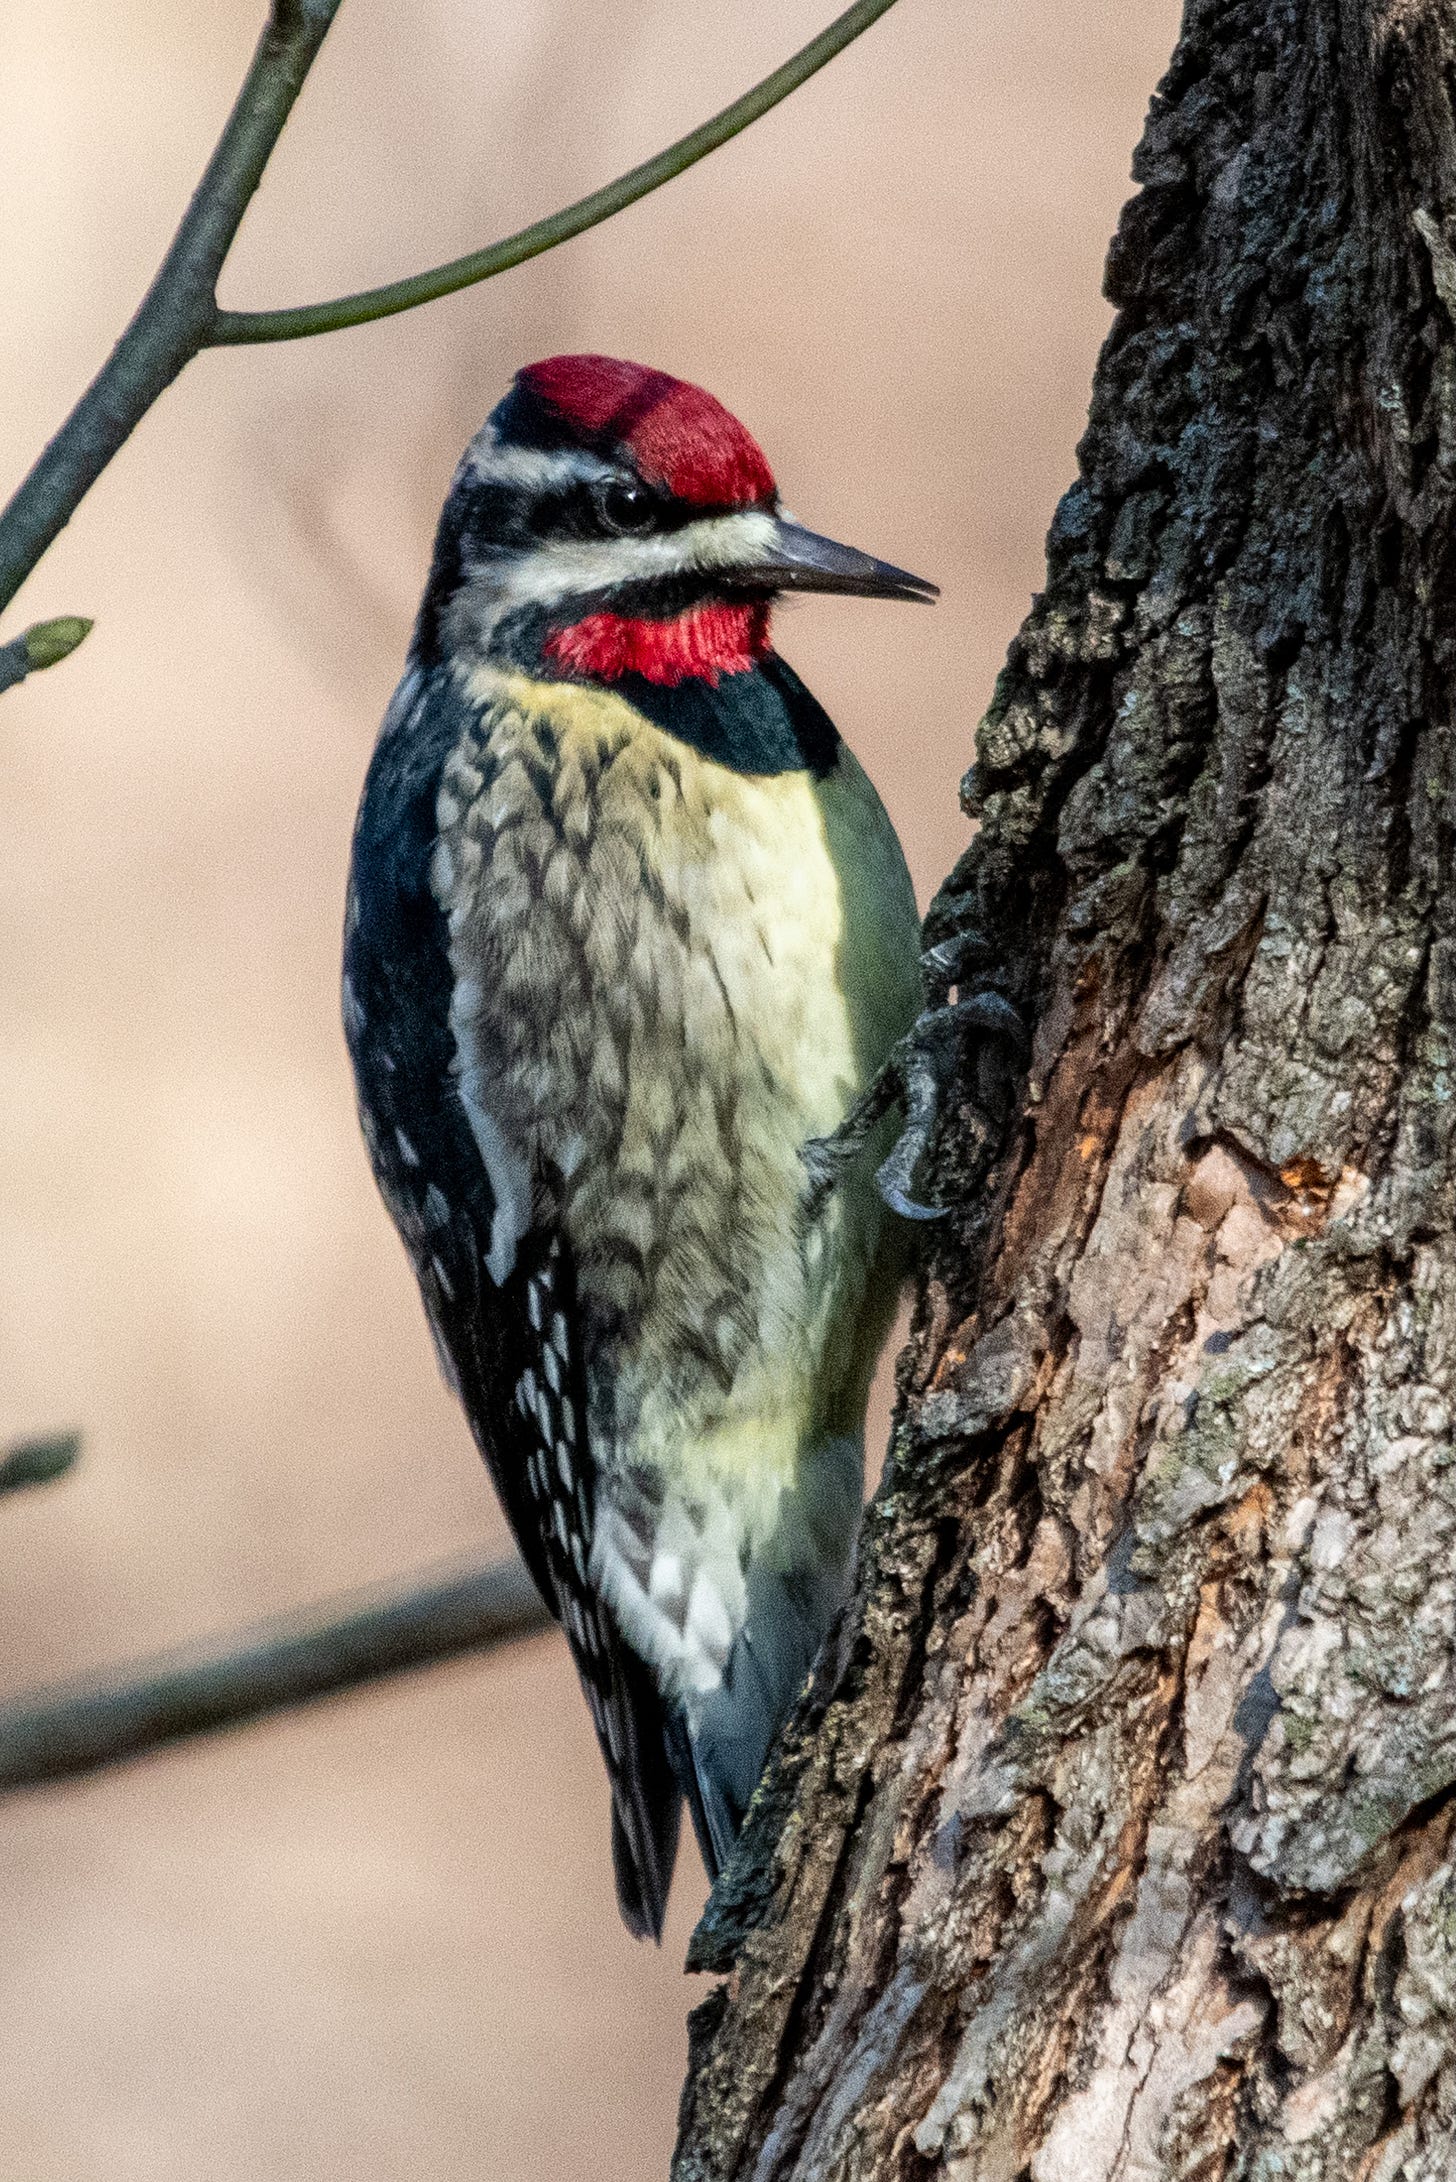 A woodpecker with a red crown and chin and a herringbone-patterned gold-tinged breast, holding onto a tree trunk